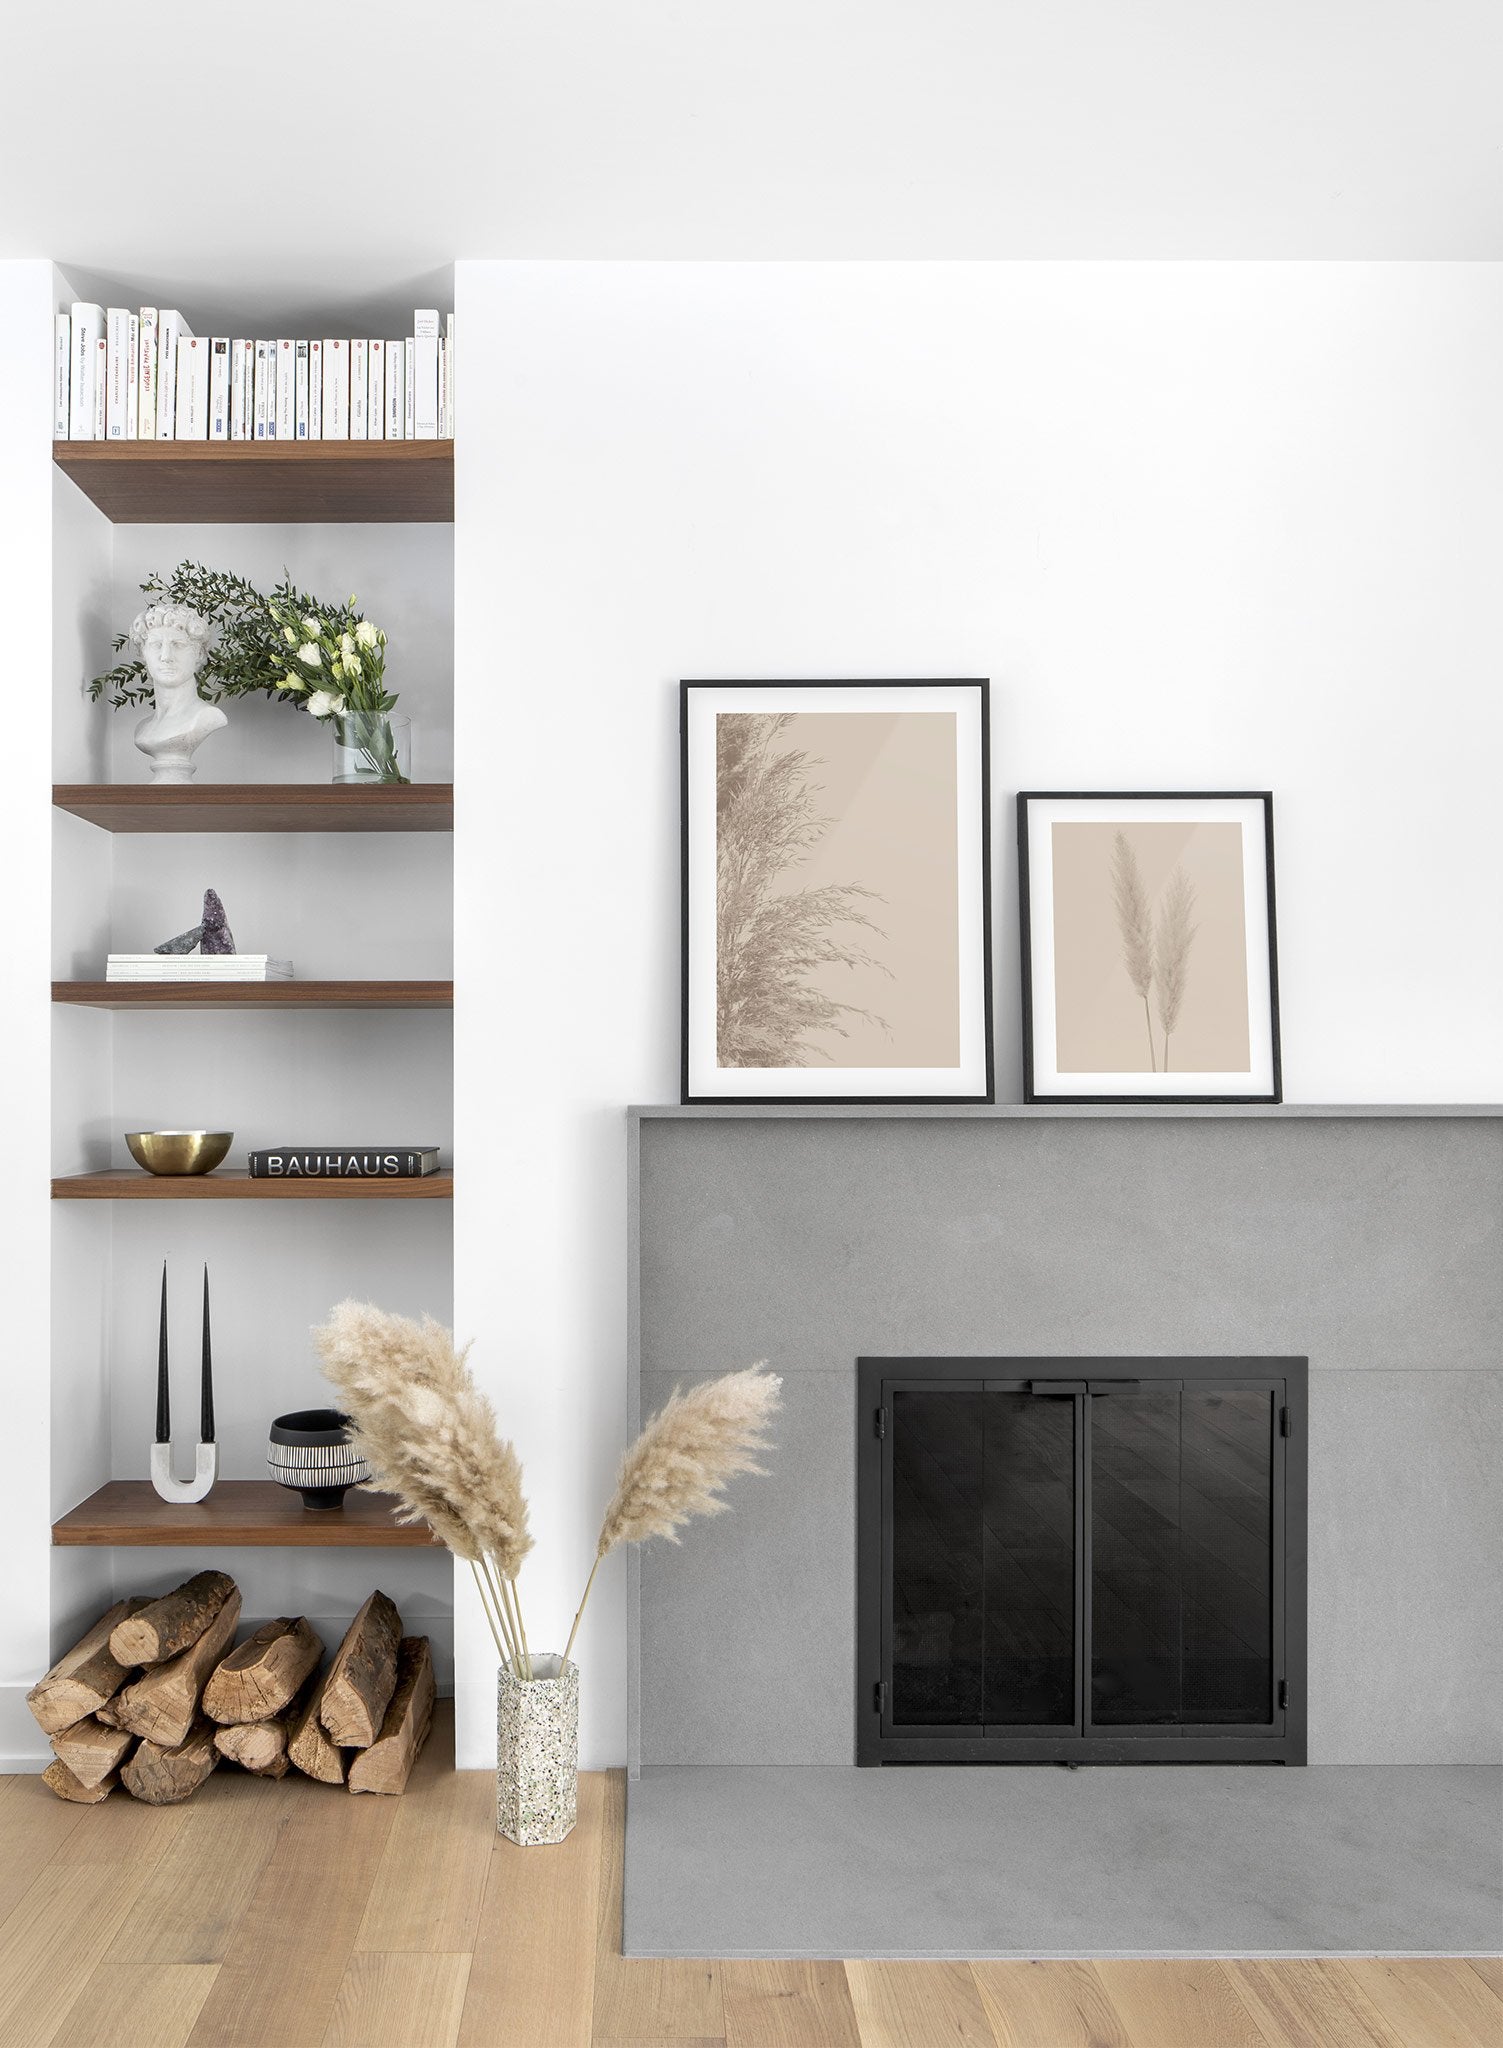 Minimalist wall poster by Opposite Wall with wispy grasses botanical photography in beige - Lifestyle Duo - Living Room